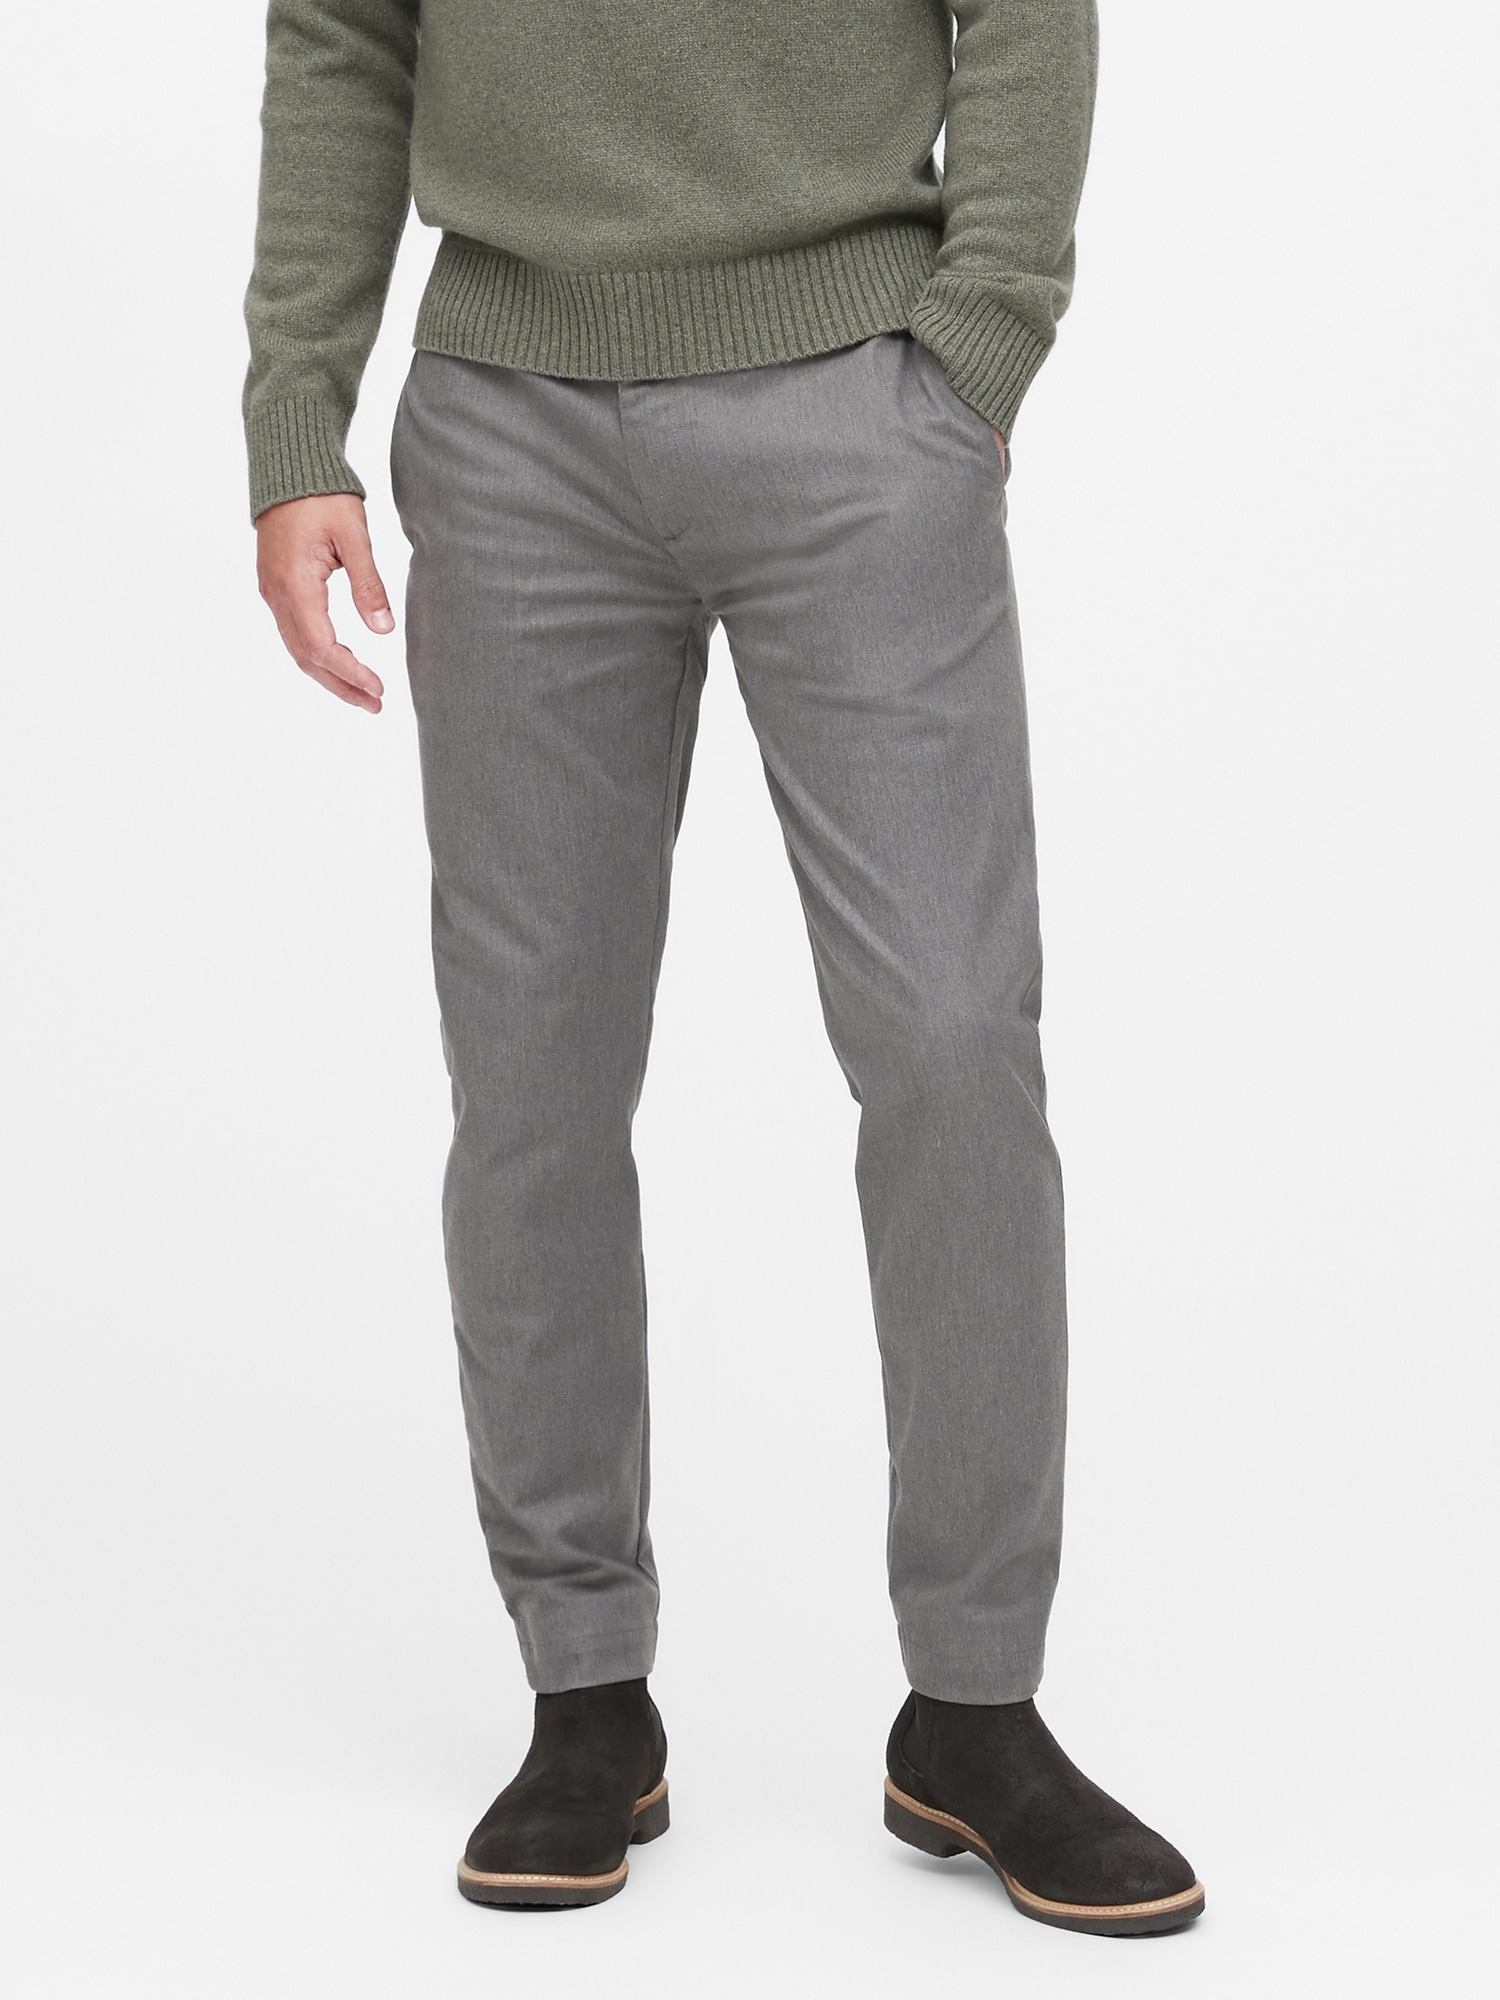 banana republic athletic tapered jeans